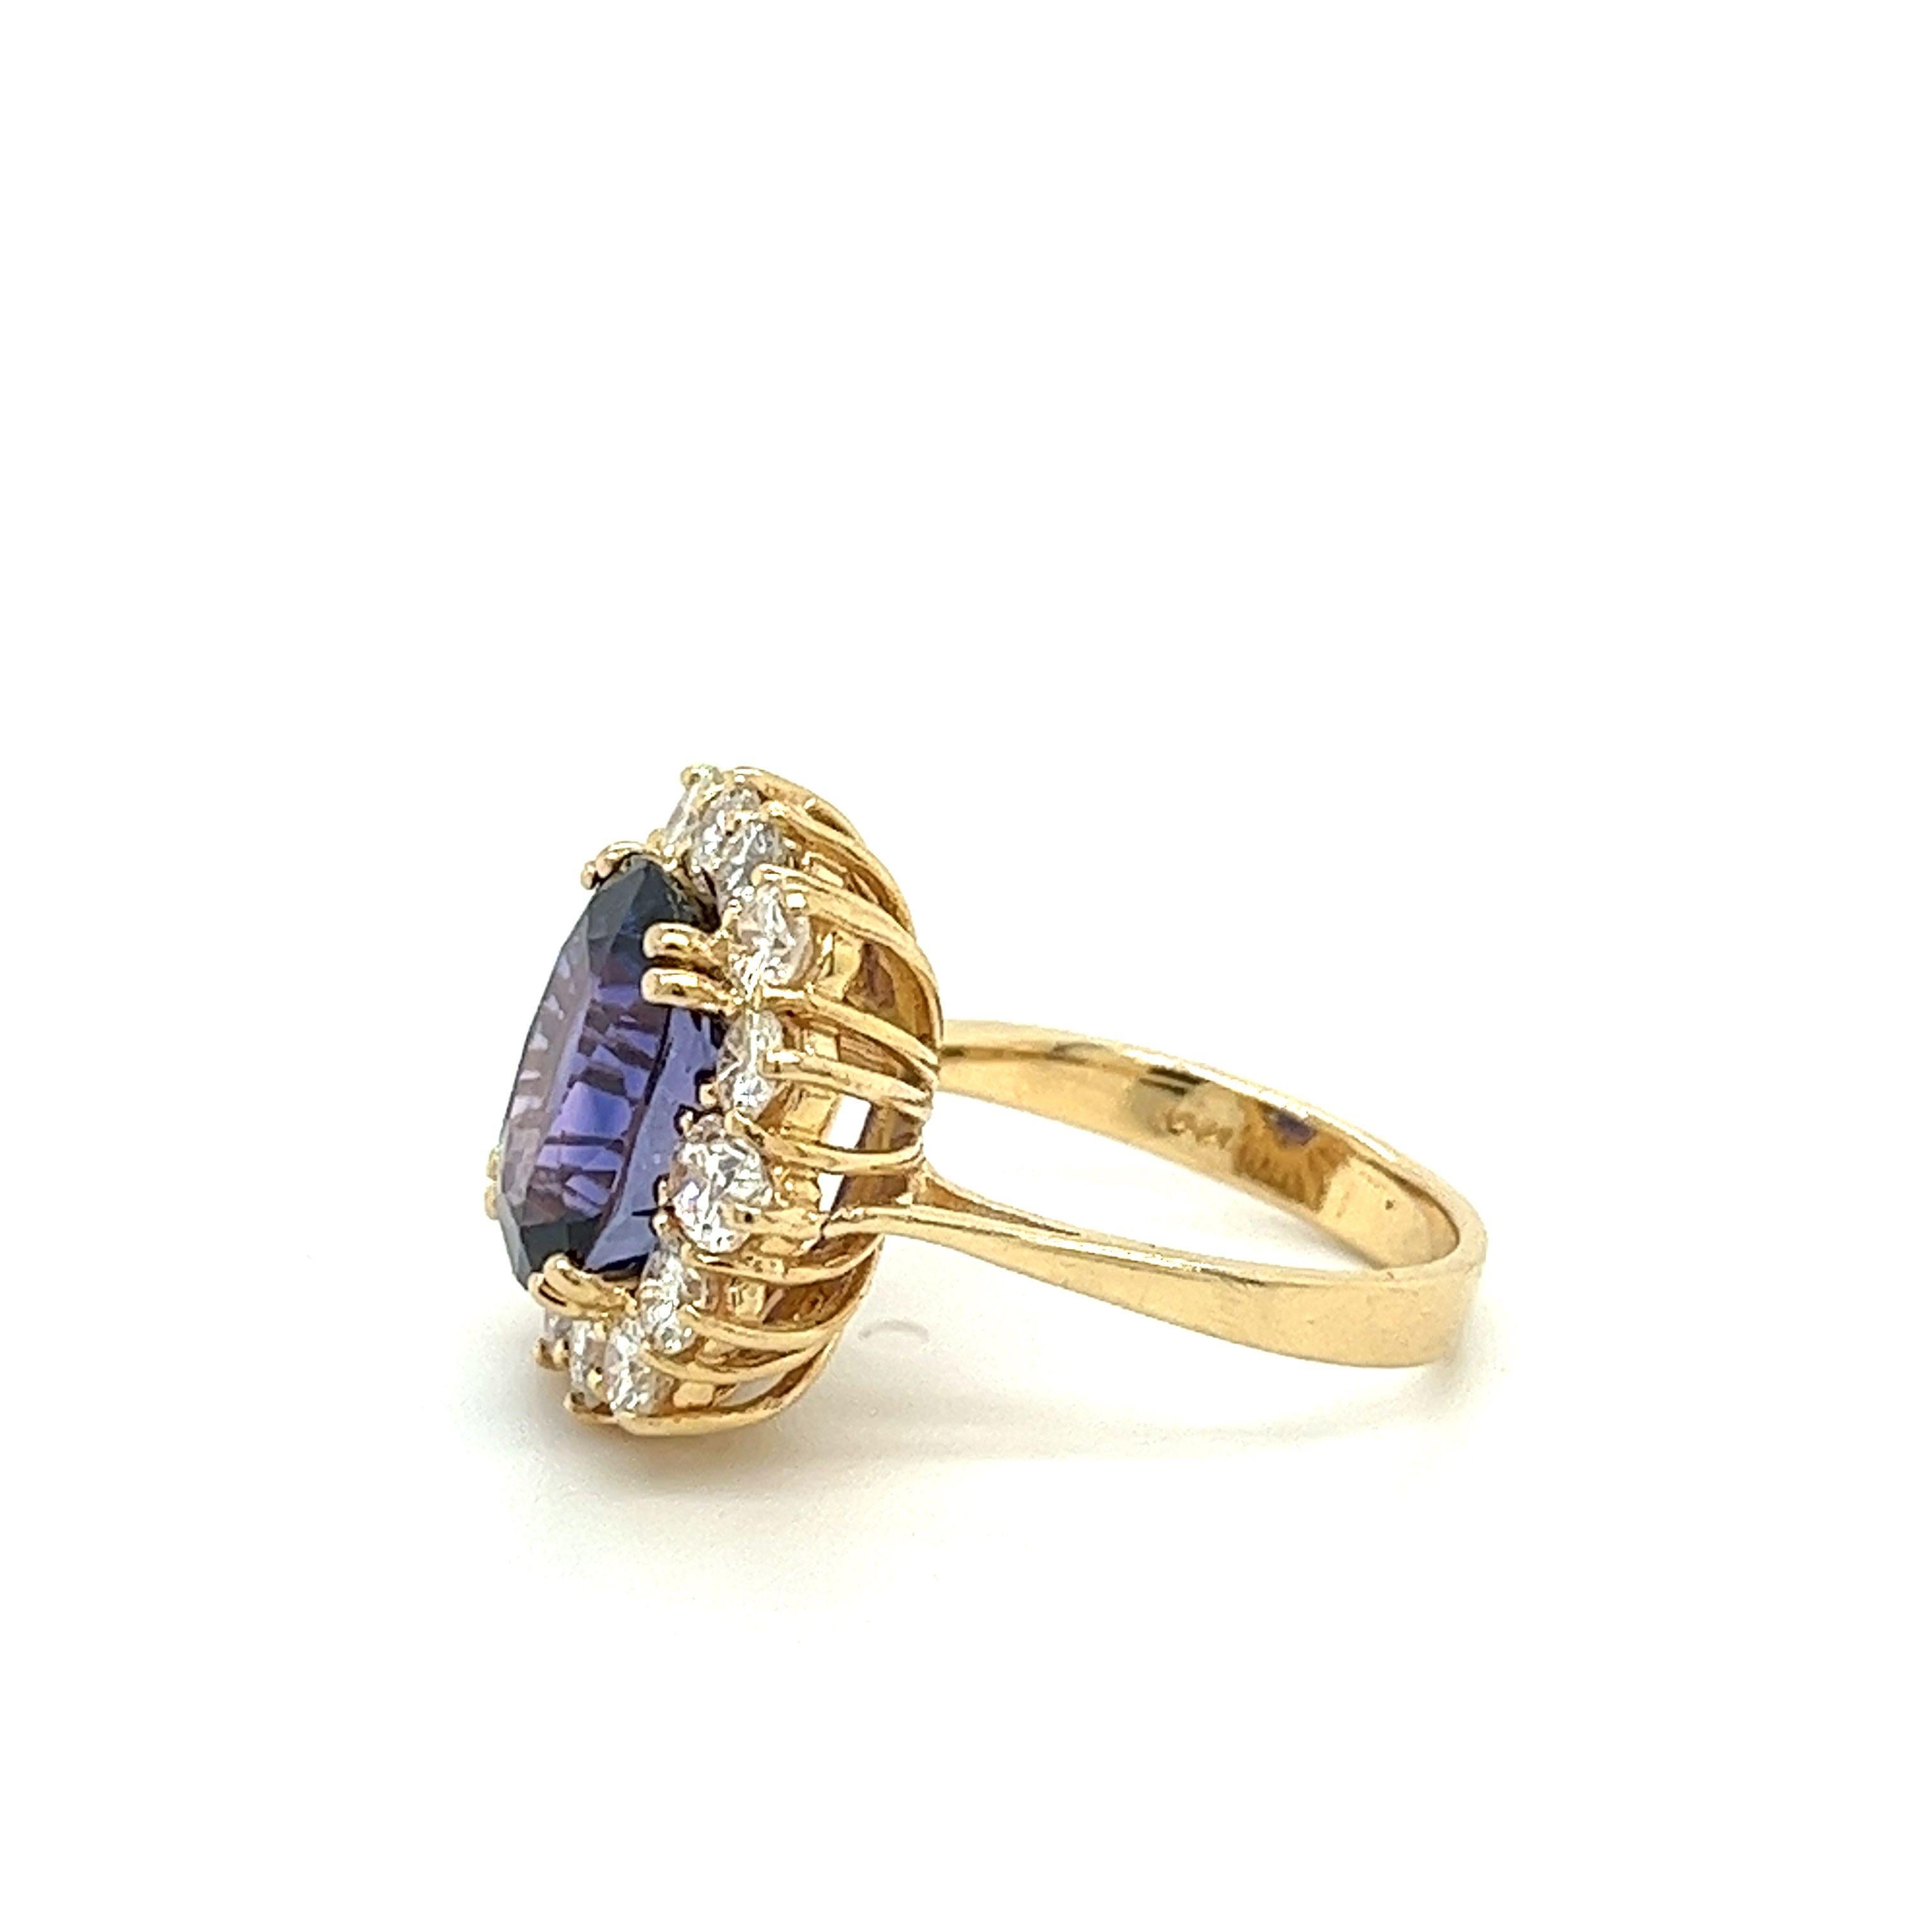 7.2 Carat Oval Cut Blue Sapphire & Diamond Halo Ring in 14K Yellow Gold In New Condition For Sale In Miami, FL